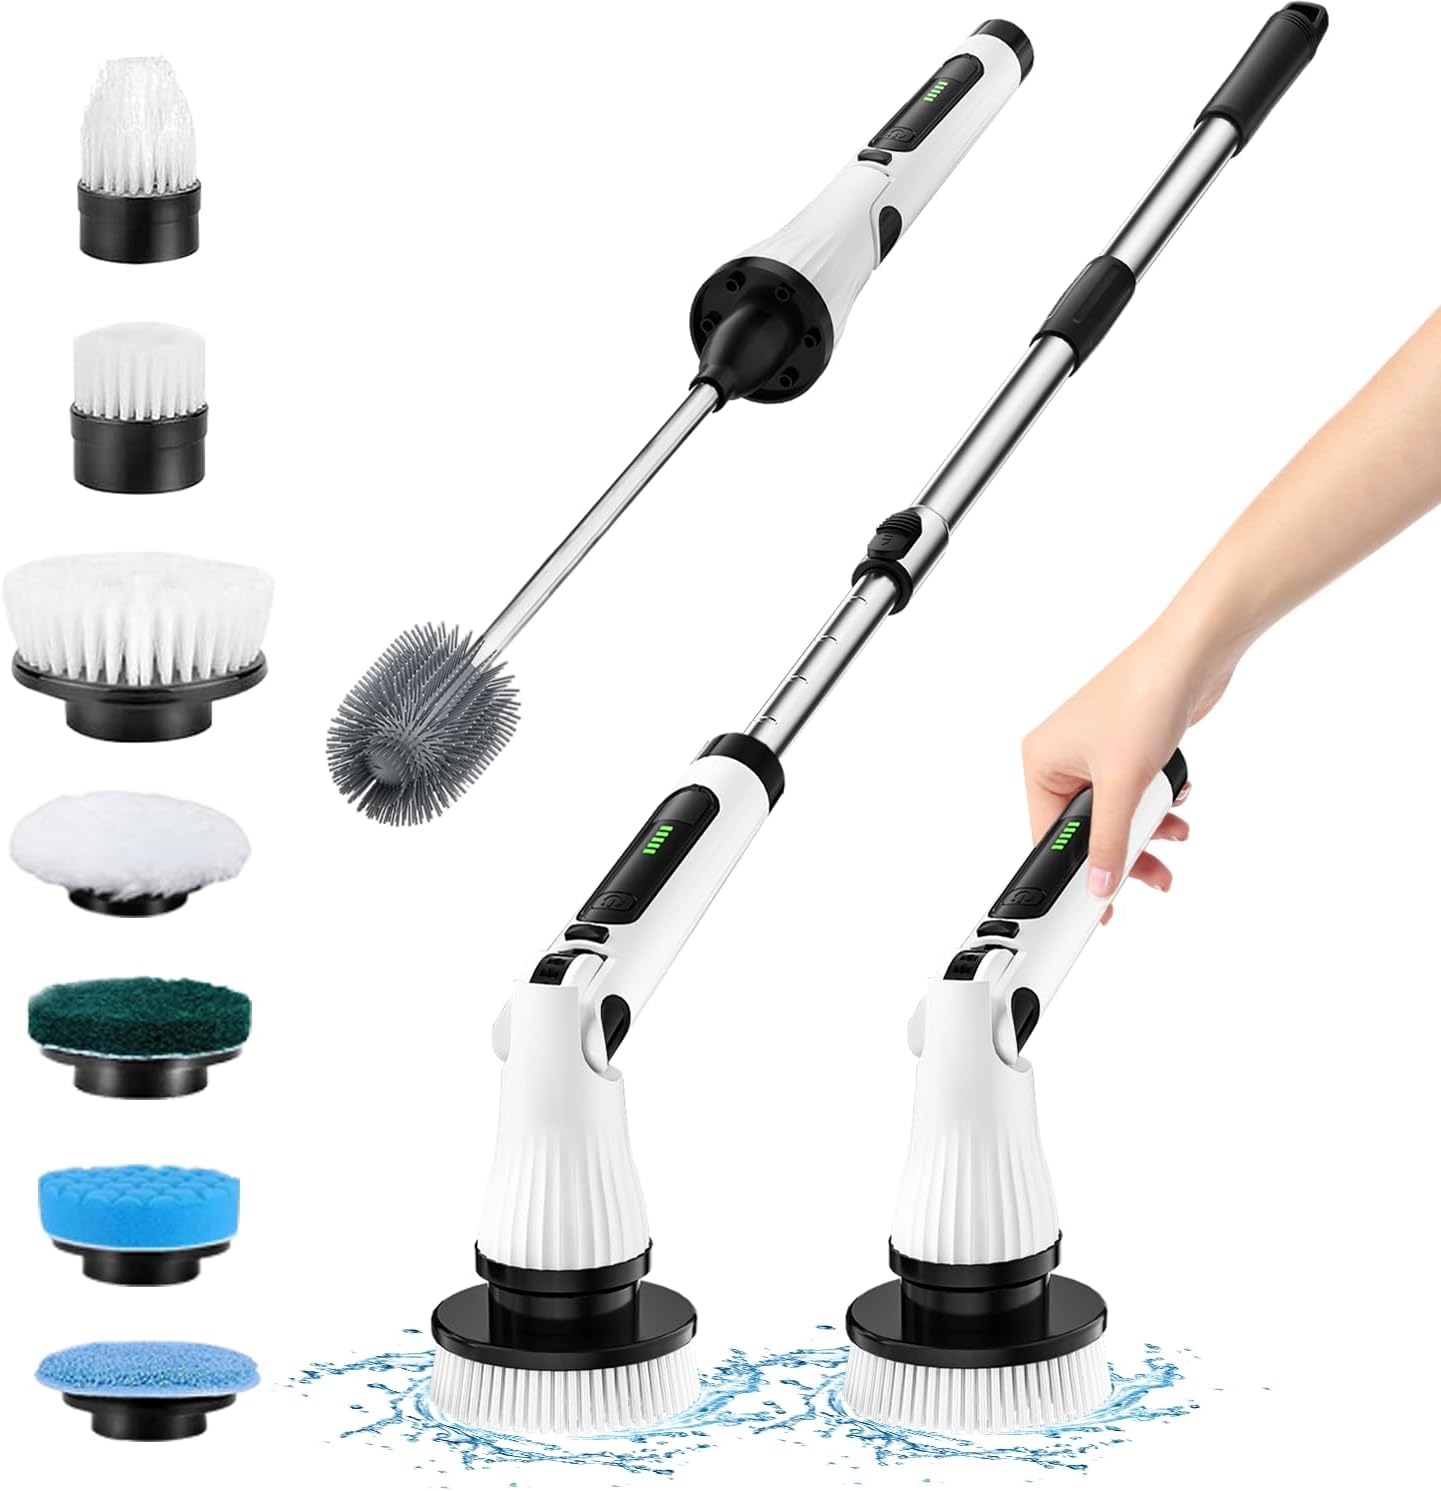  kHelfer Electric Cleaning Brush, KH6A Electric Grout